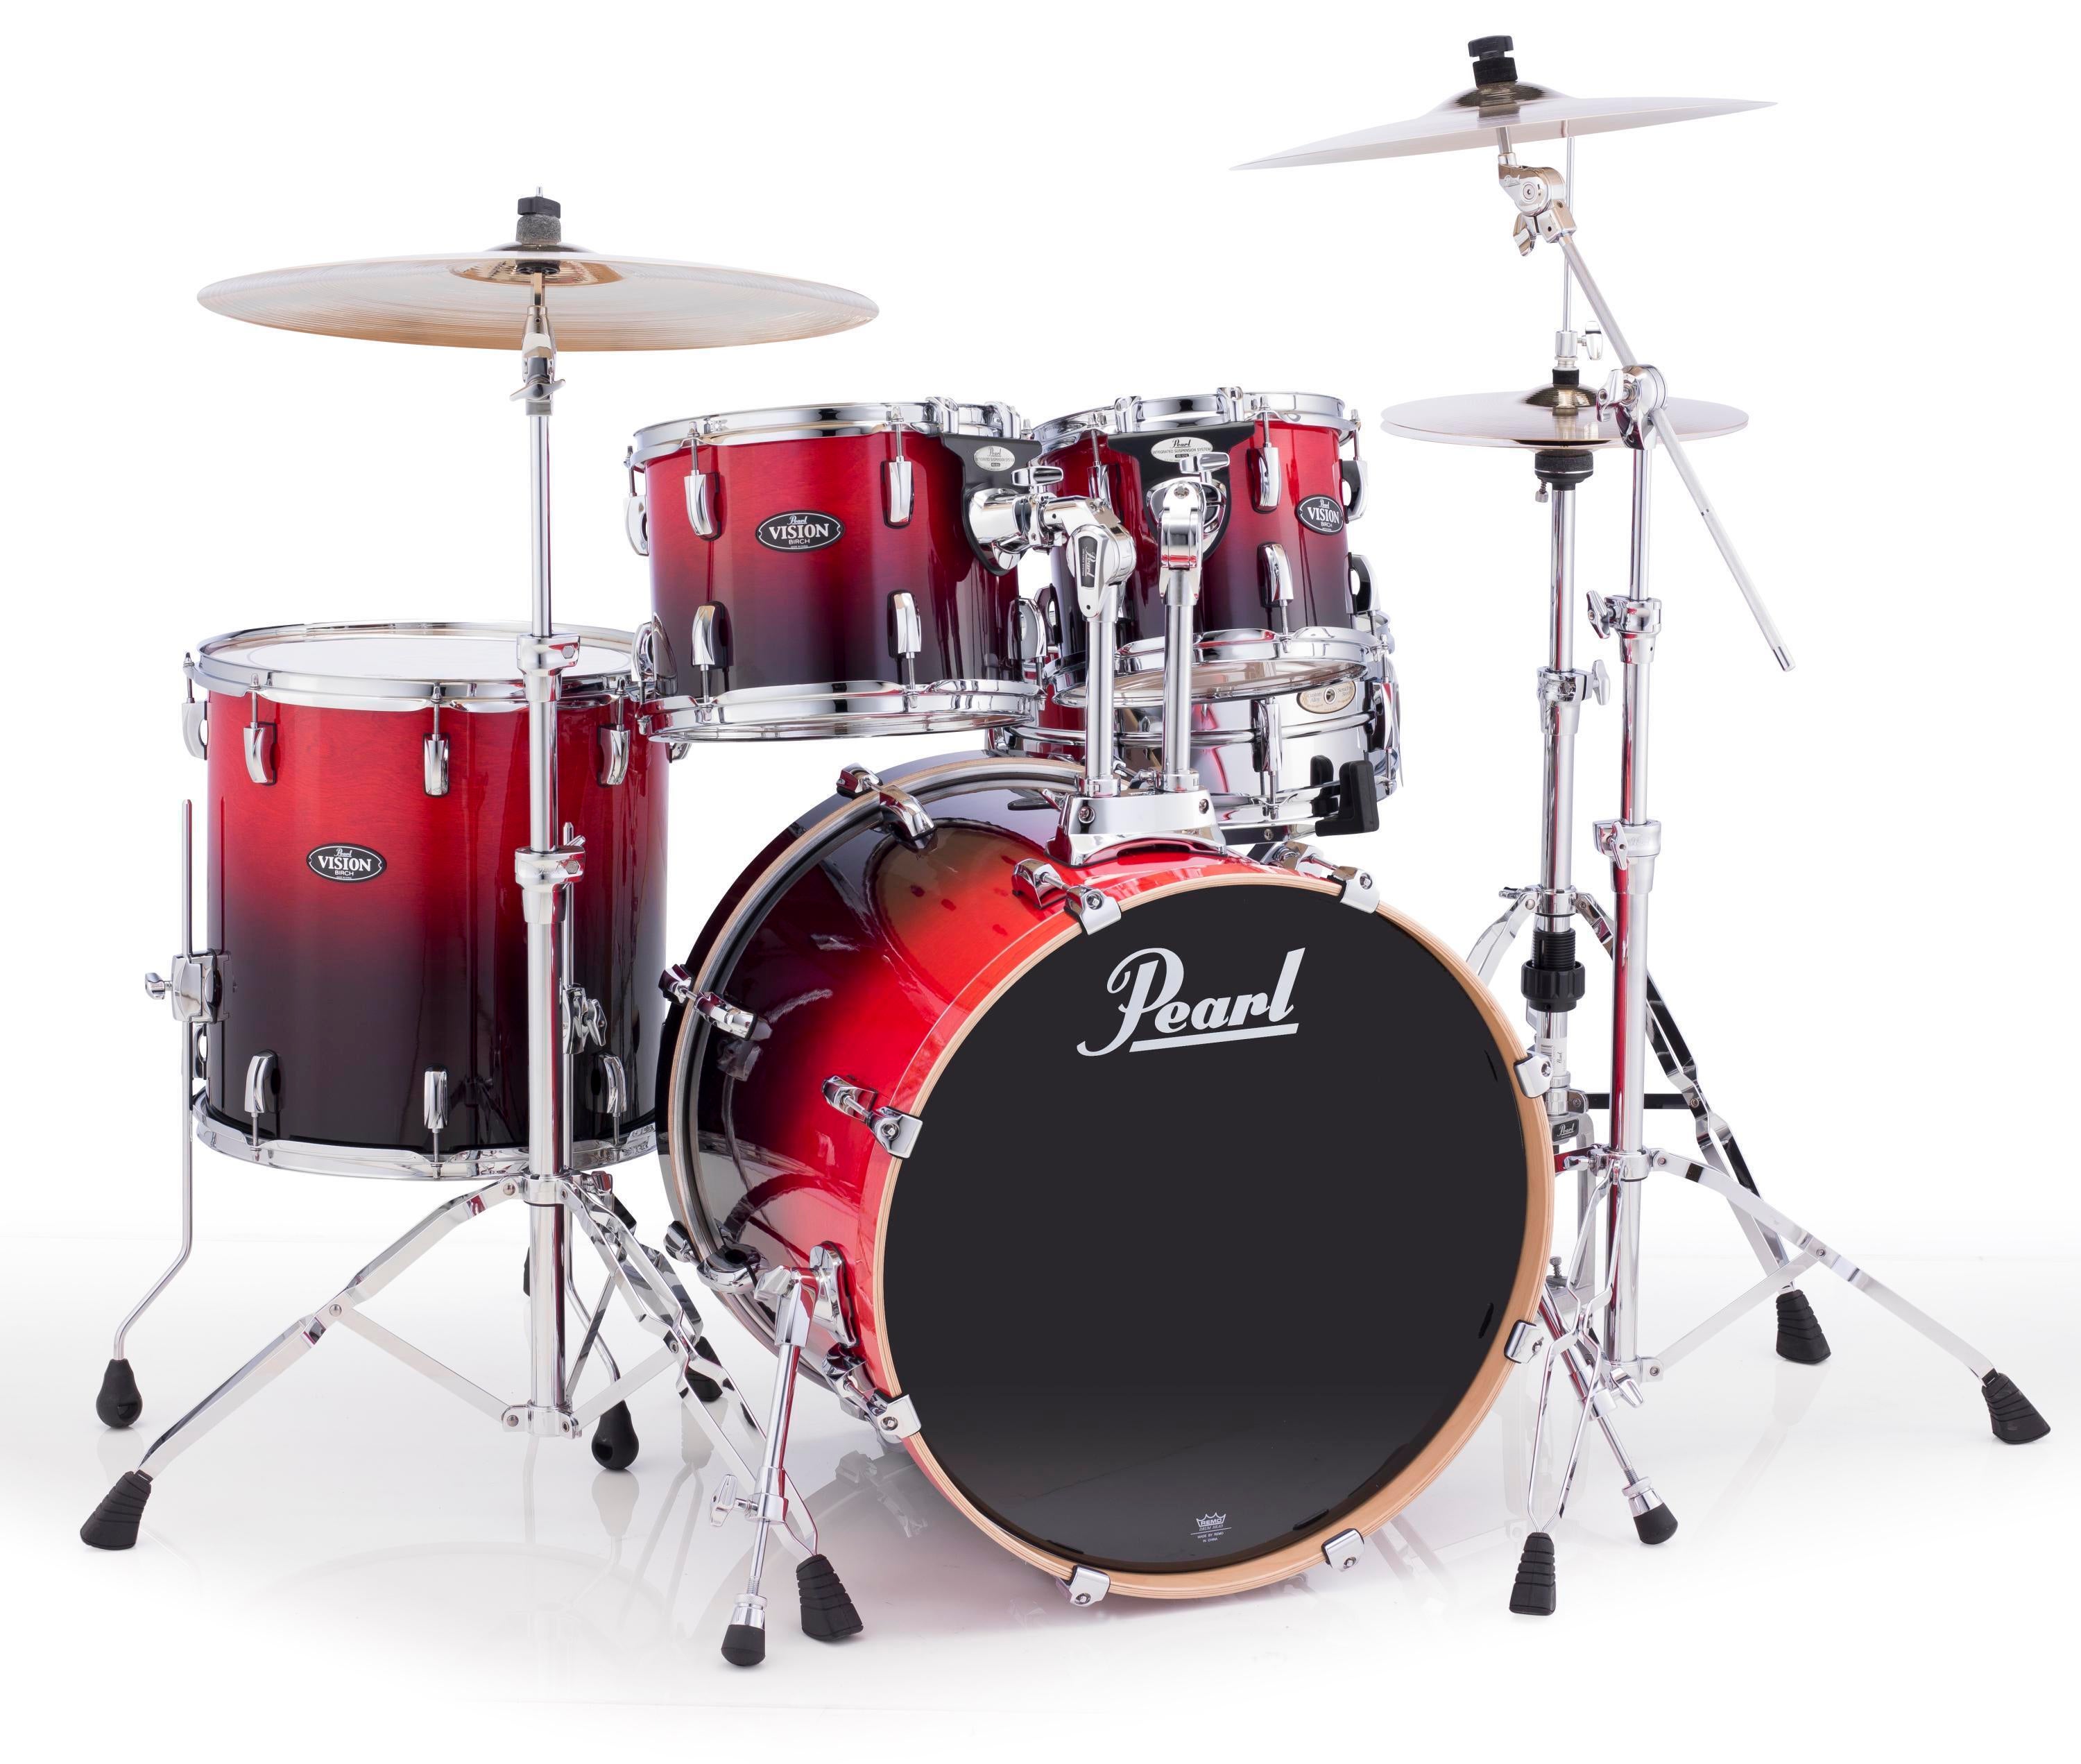 Pearl Vision Birch VBL 5-Piece Kit - Ruby Fade Reviews | Sweetwater